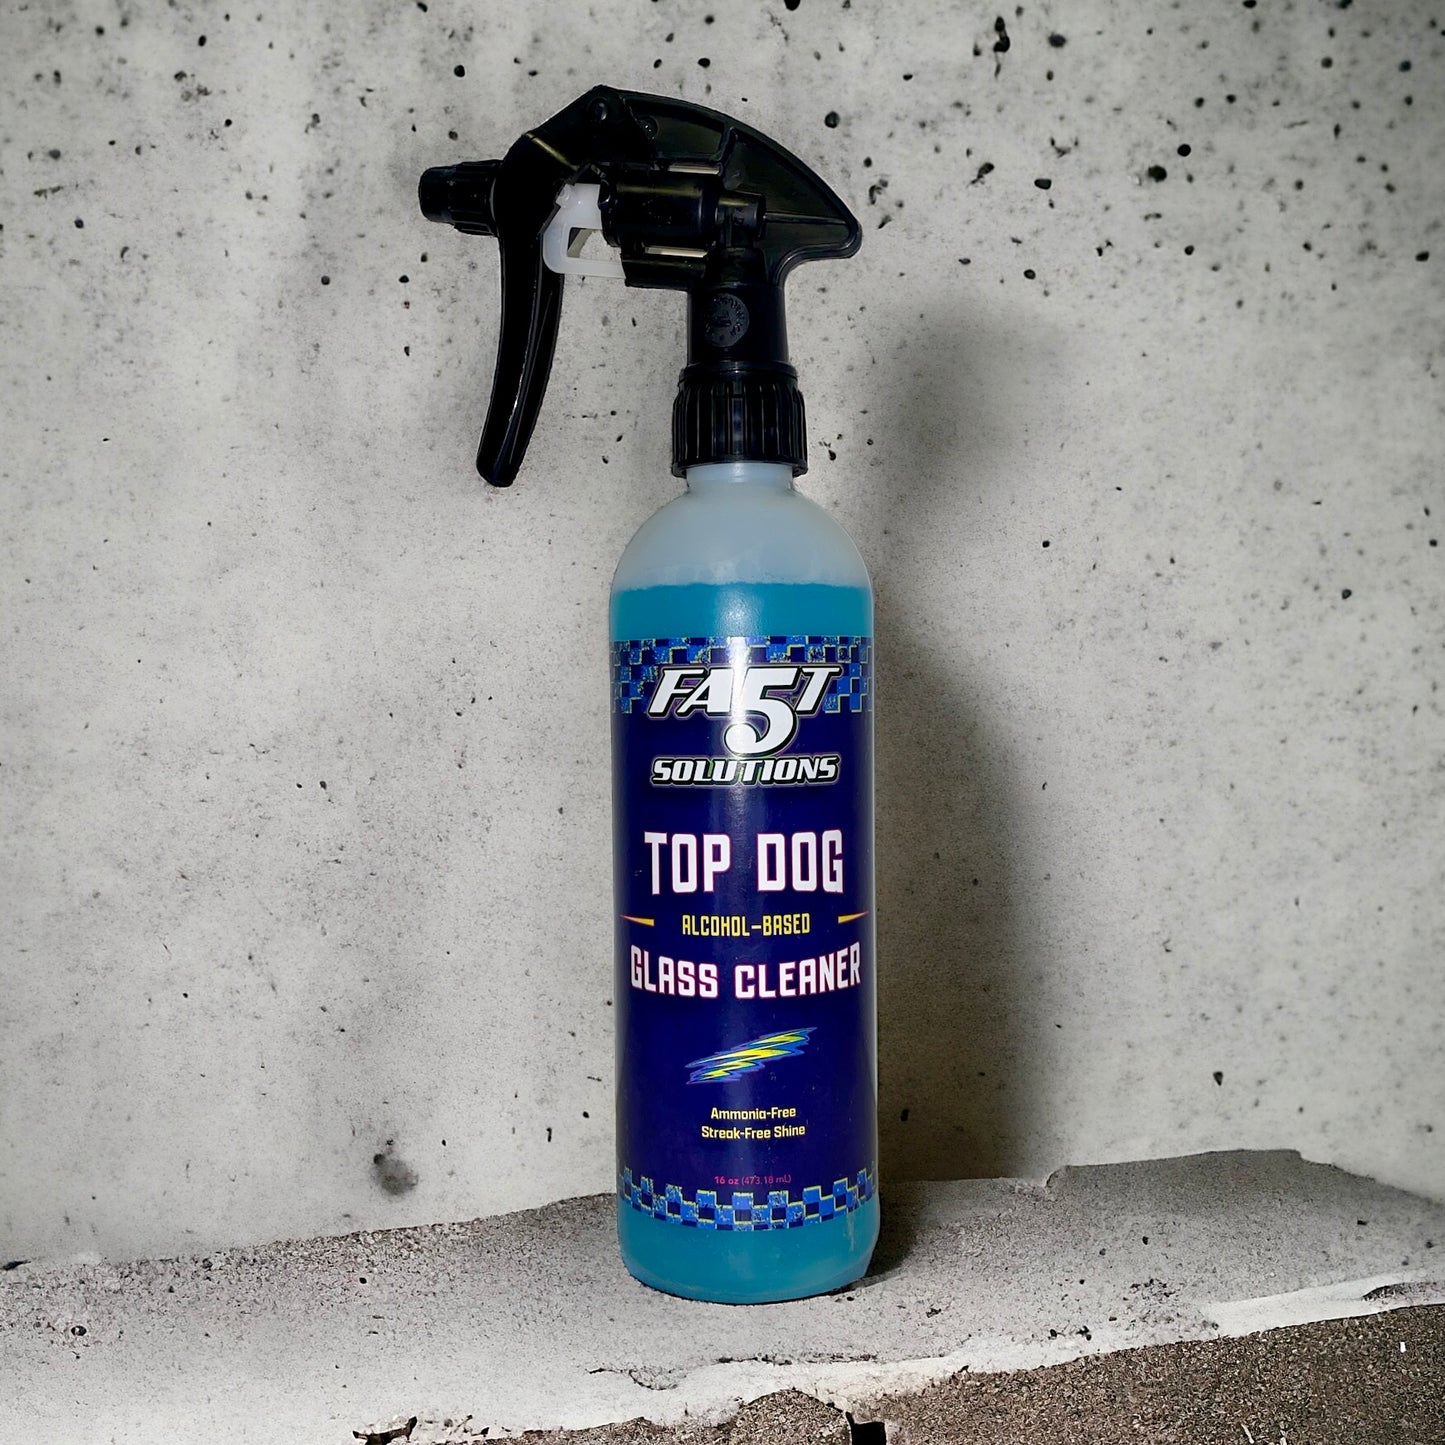 Top Dog Glass Cleaner